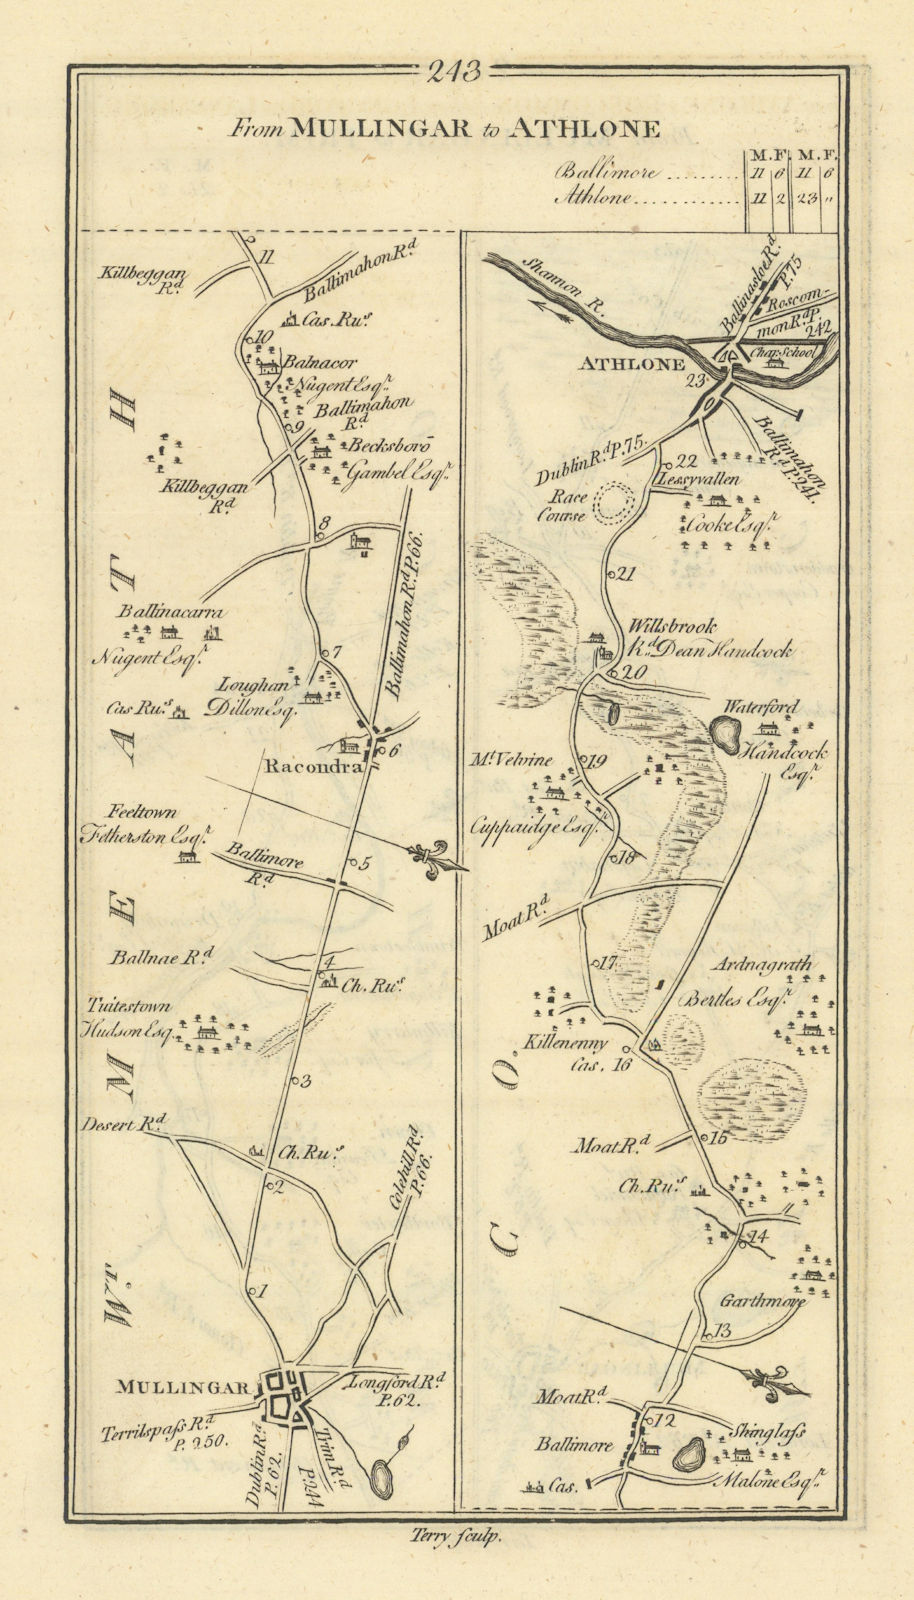 Associate Product #243 From Mullingar to Athlone. Rathconrath Westmeath. TAYLOR/SKINNER 1778 map